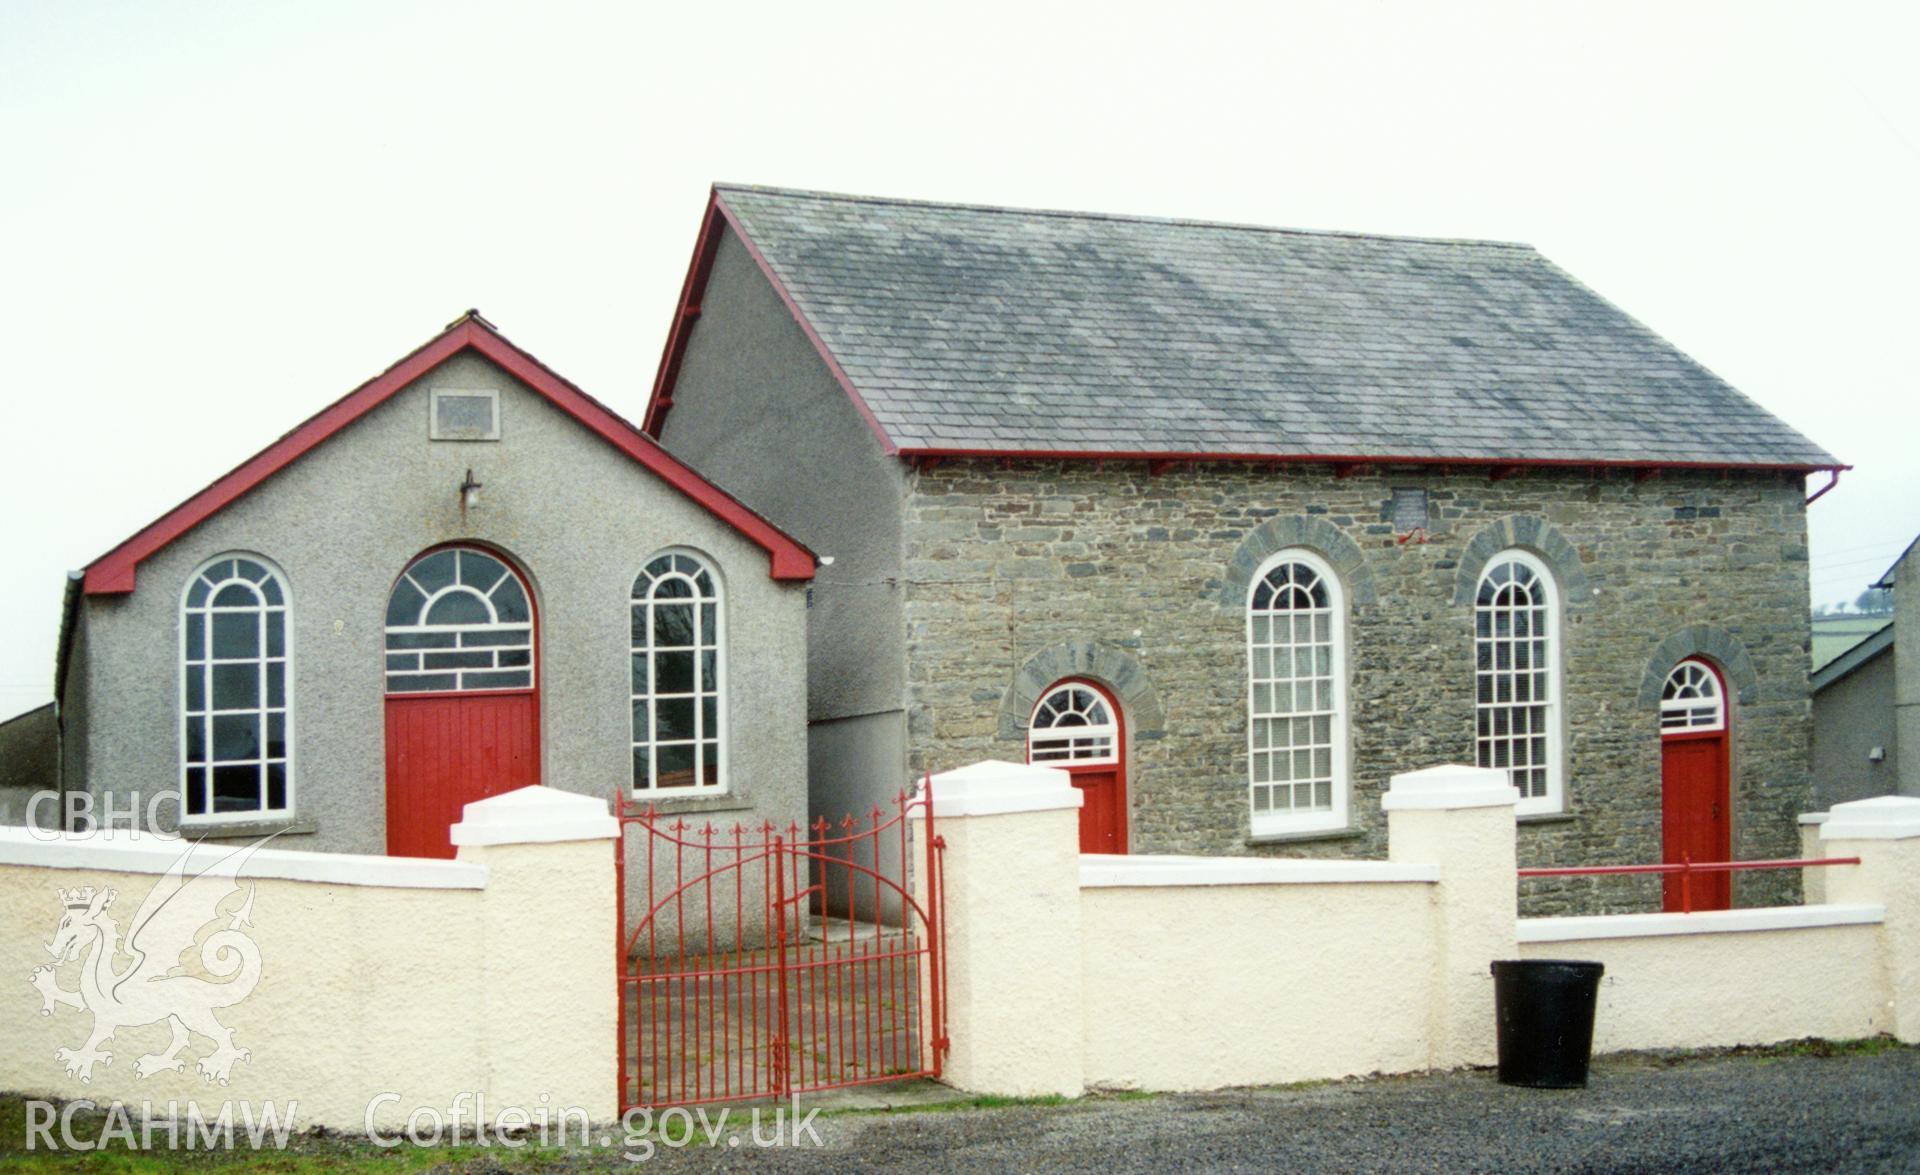 Digital copy of a colour photograph showing an exterior view of Troed-y-rhiw Welsh Independent Chapel, Cribyn,  taken by Robert Scourfield, c.1996.